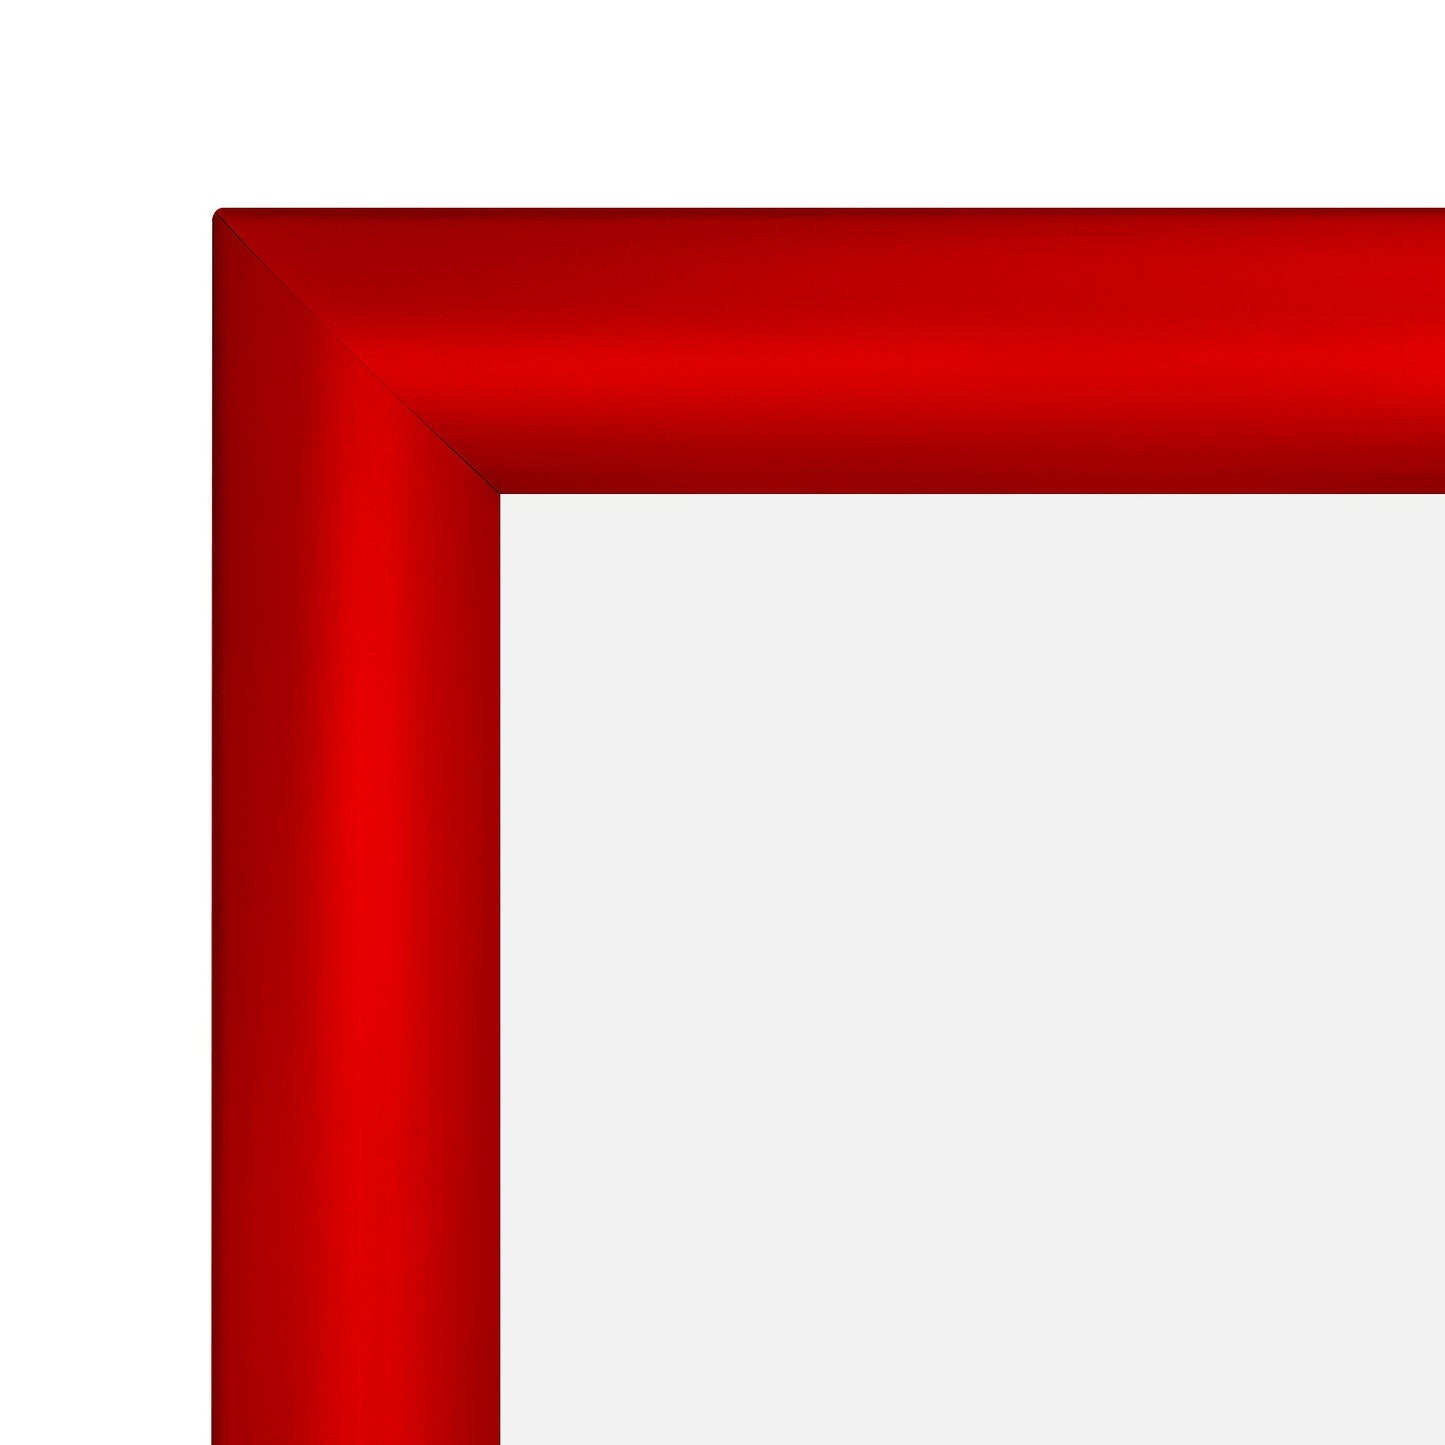 12x17 Red SnapeZo® Snap Frame - 1.2" Profile